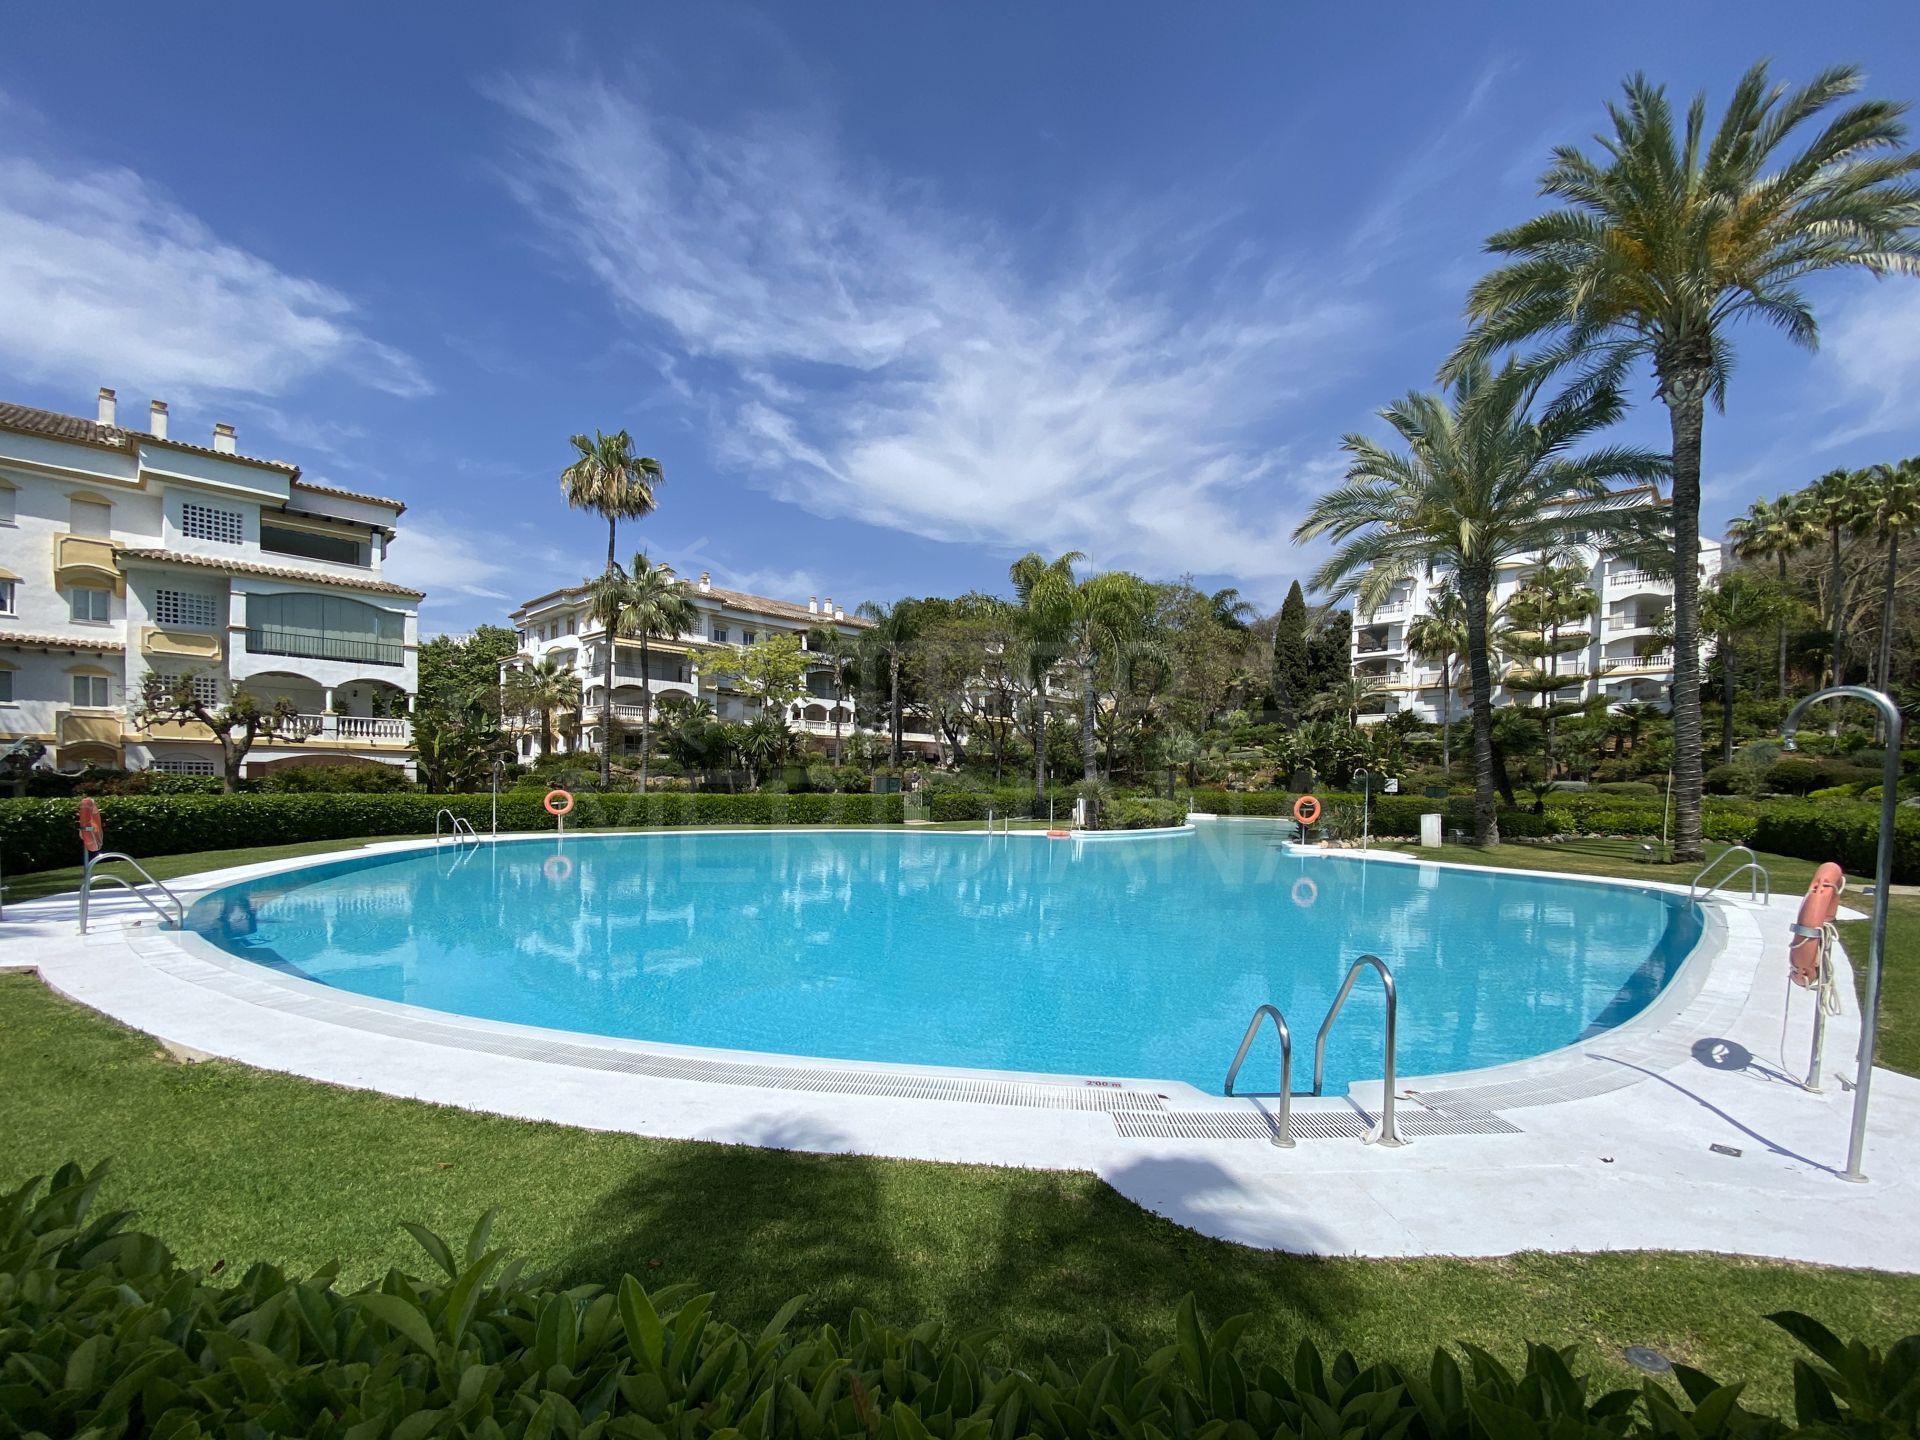 Upgraded luxury villa with 4 bedrooms for sale in the heart of Marbella's Golden Mile